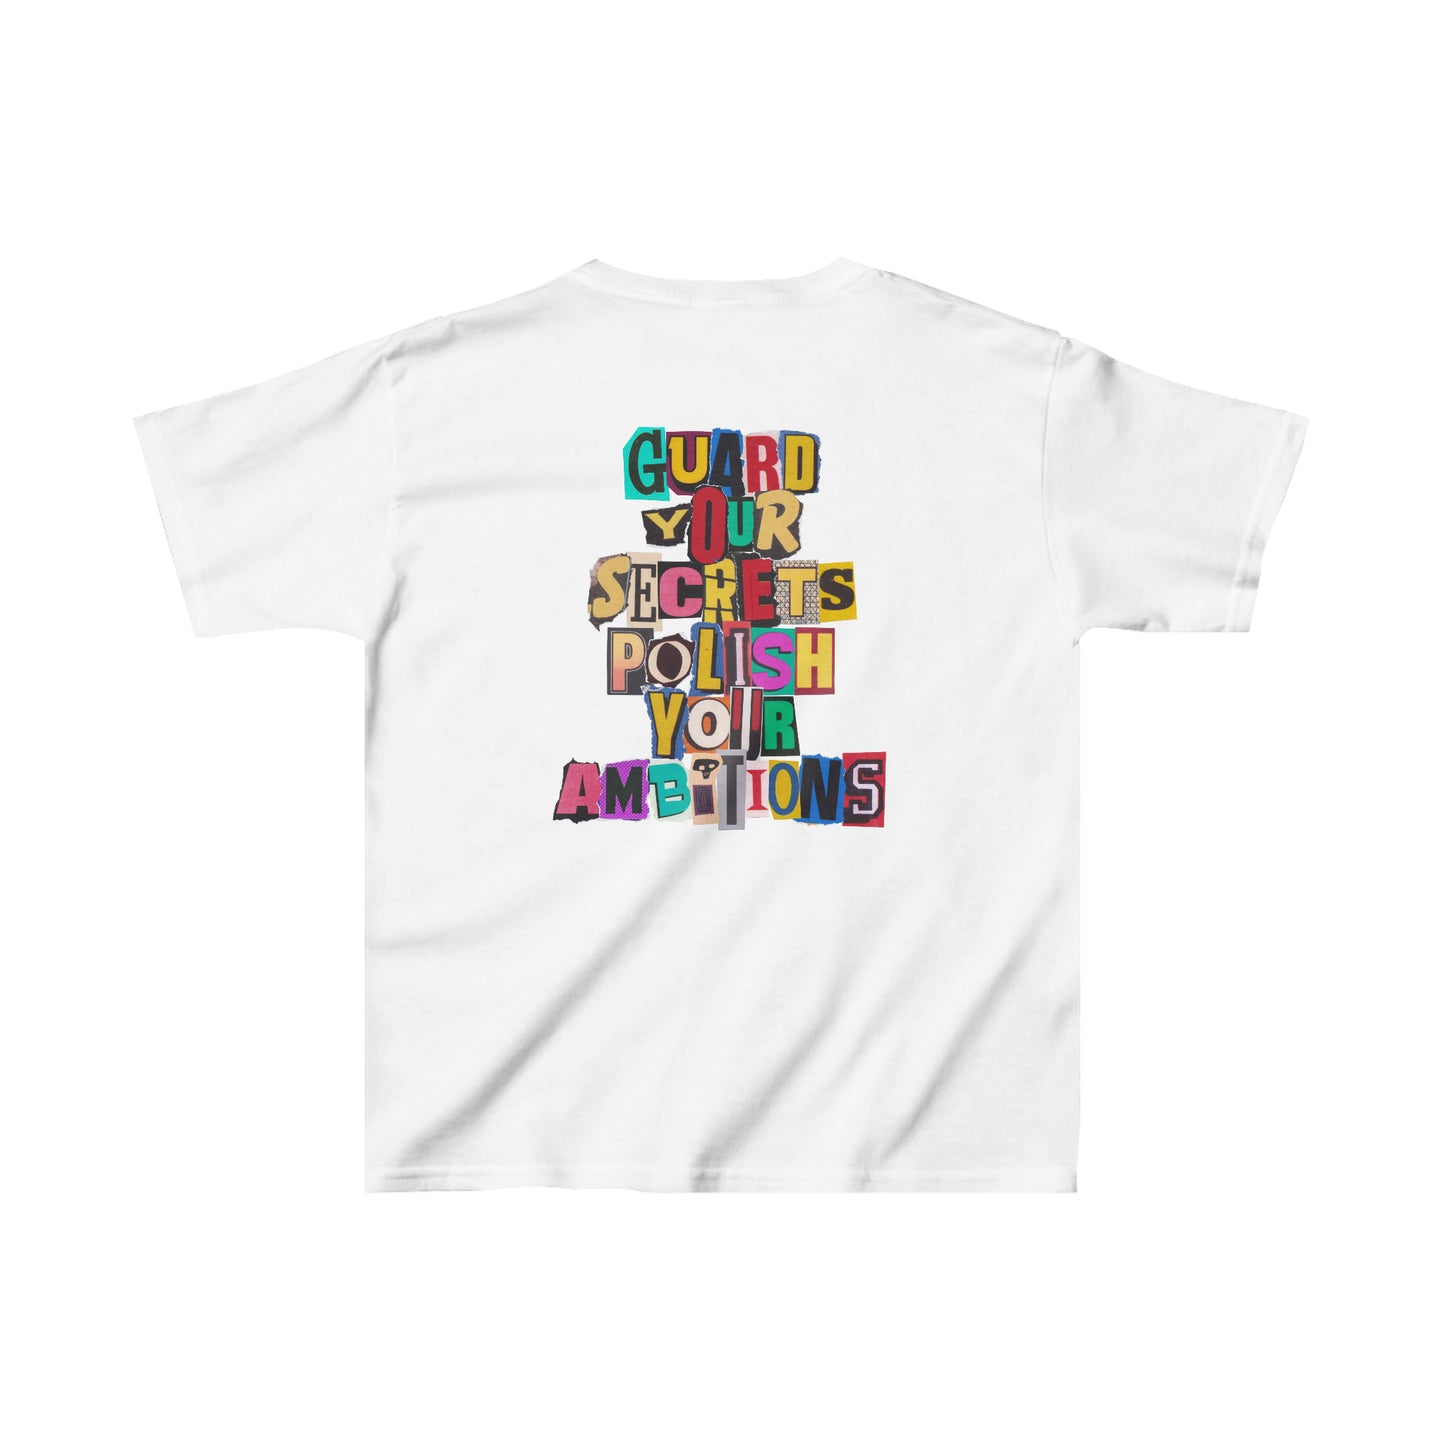 Youth WIY x Chase Vintage T-Shirt